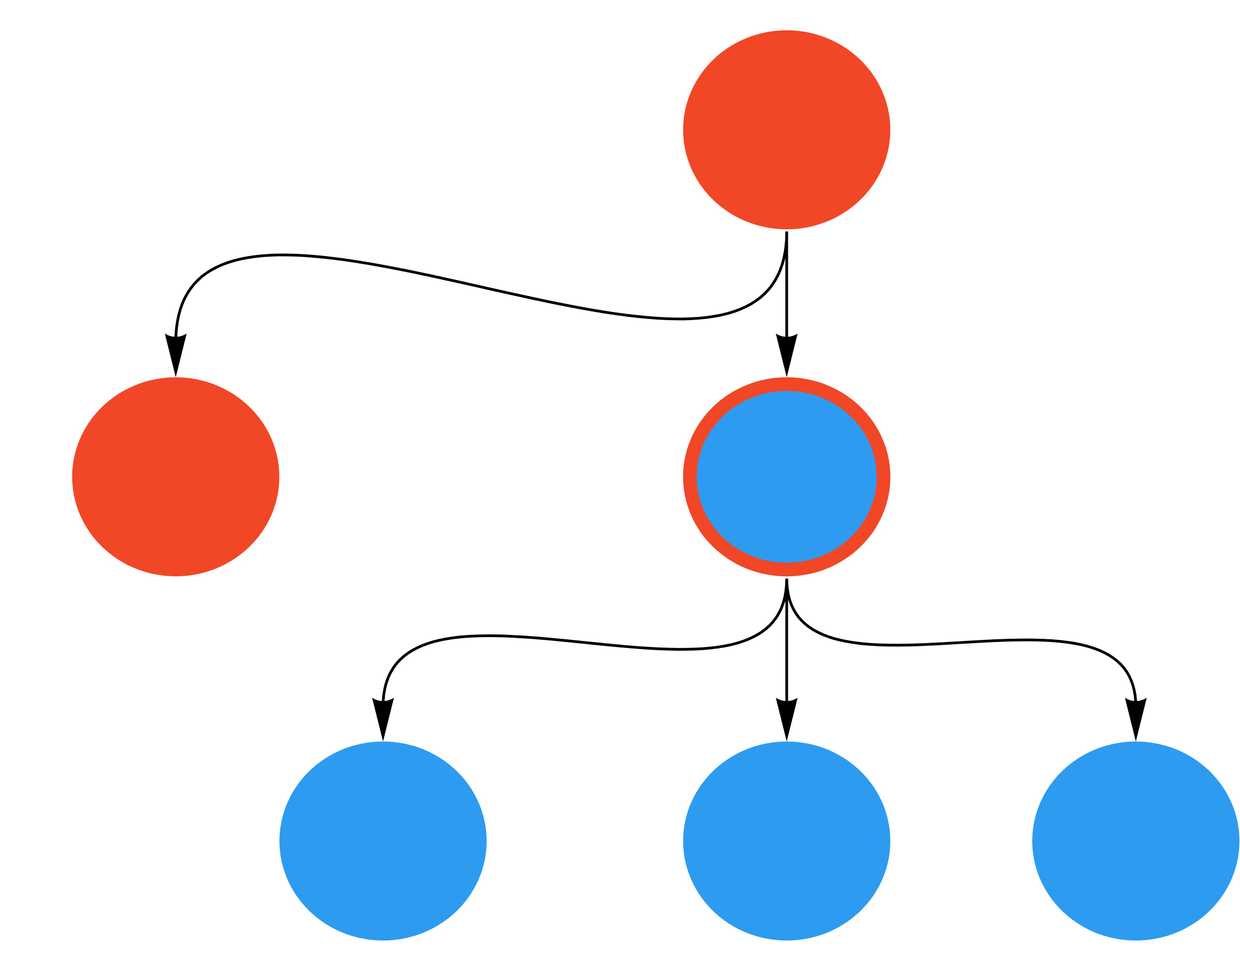 As the previous tree diagram but now the root red node has another red (Angular) node running off of it, into a separate branch with no blue (AngularJS) nodes.